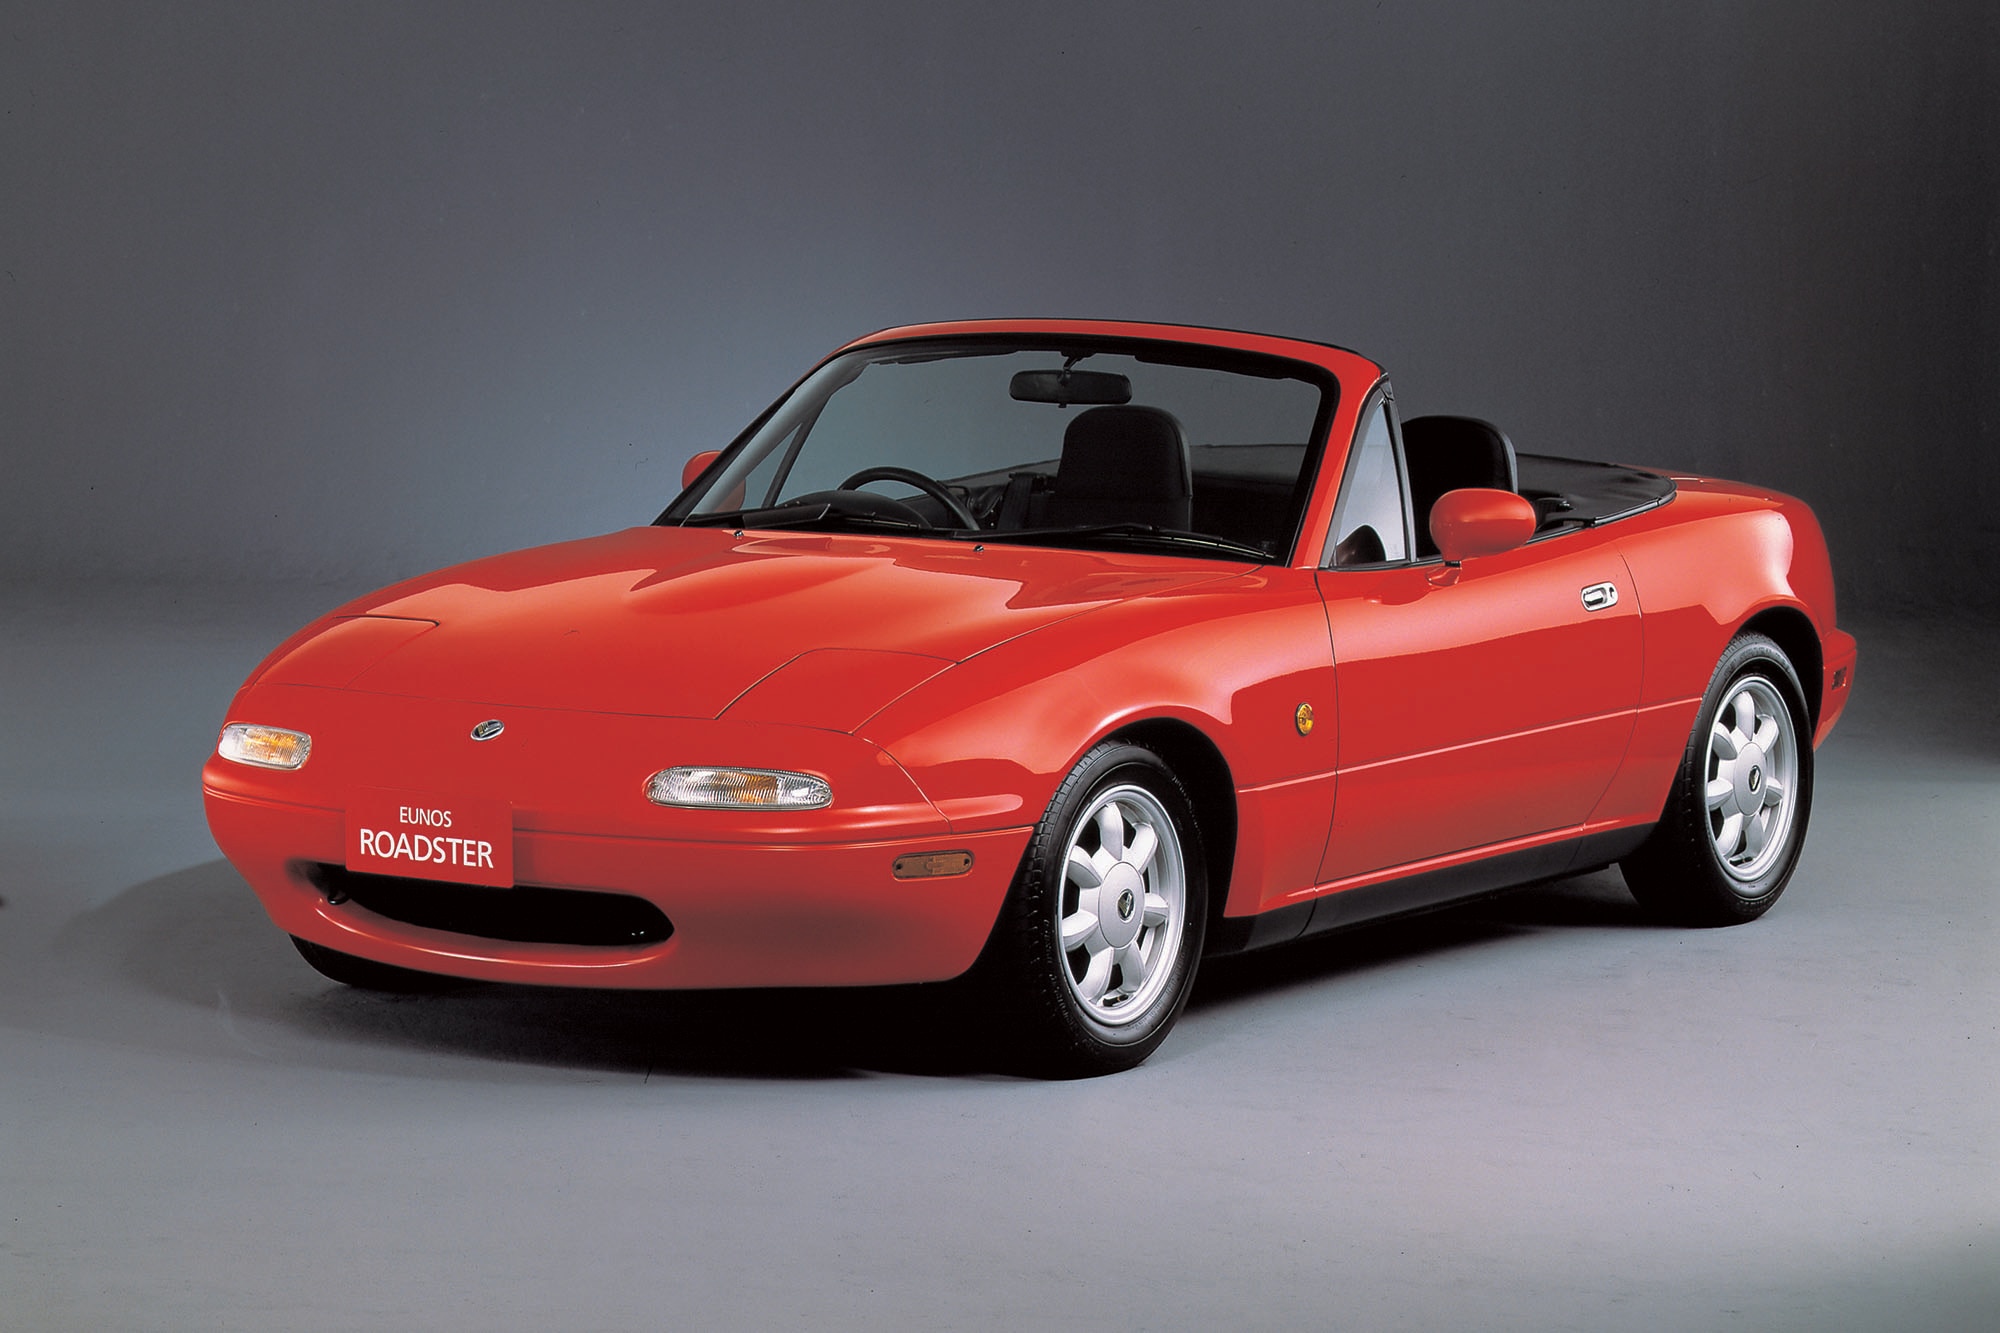 A red 1990 Mazda Miata with Japanese Domestic Market Eunos Roadster labeling